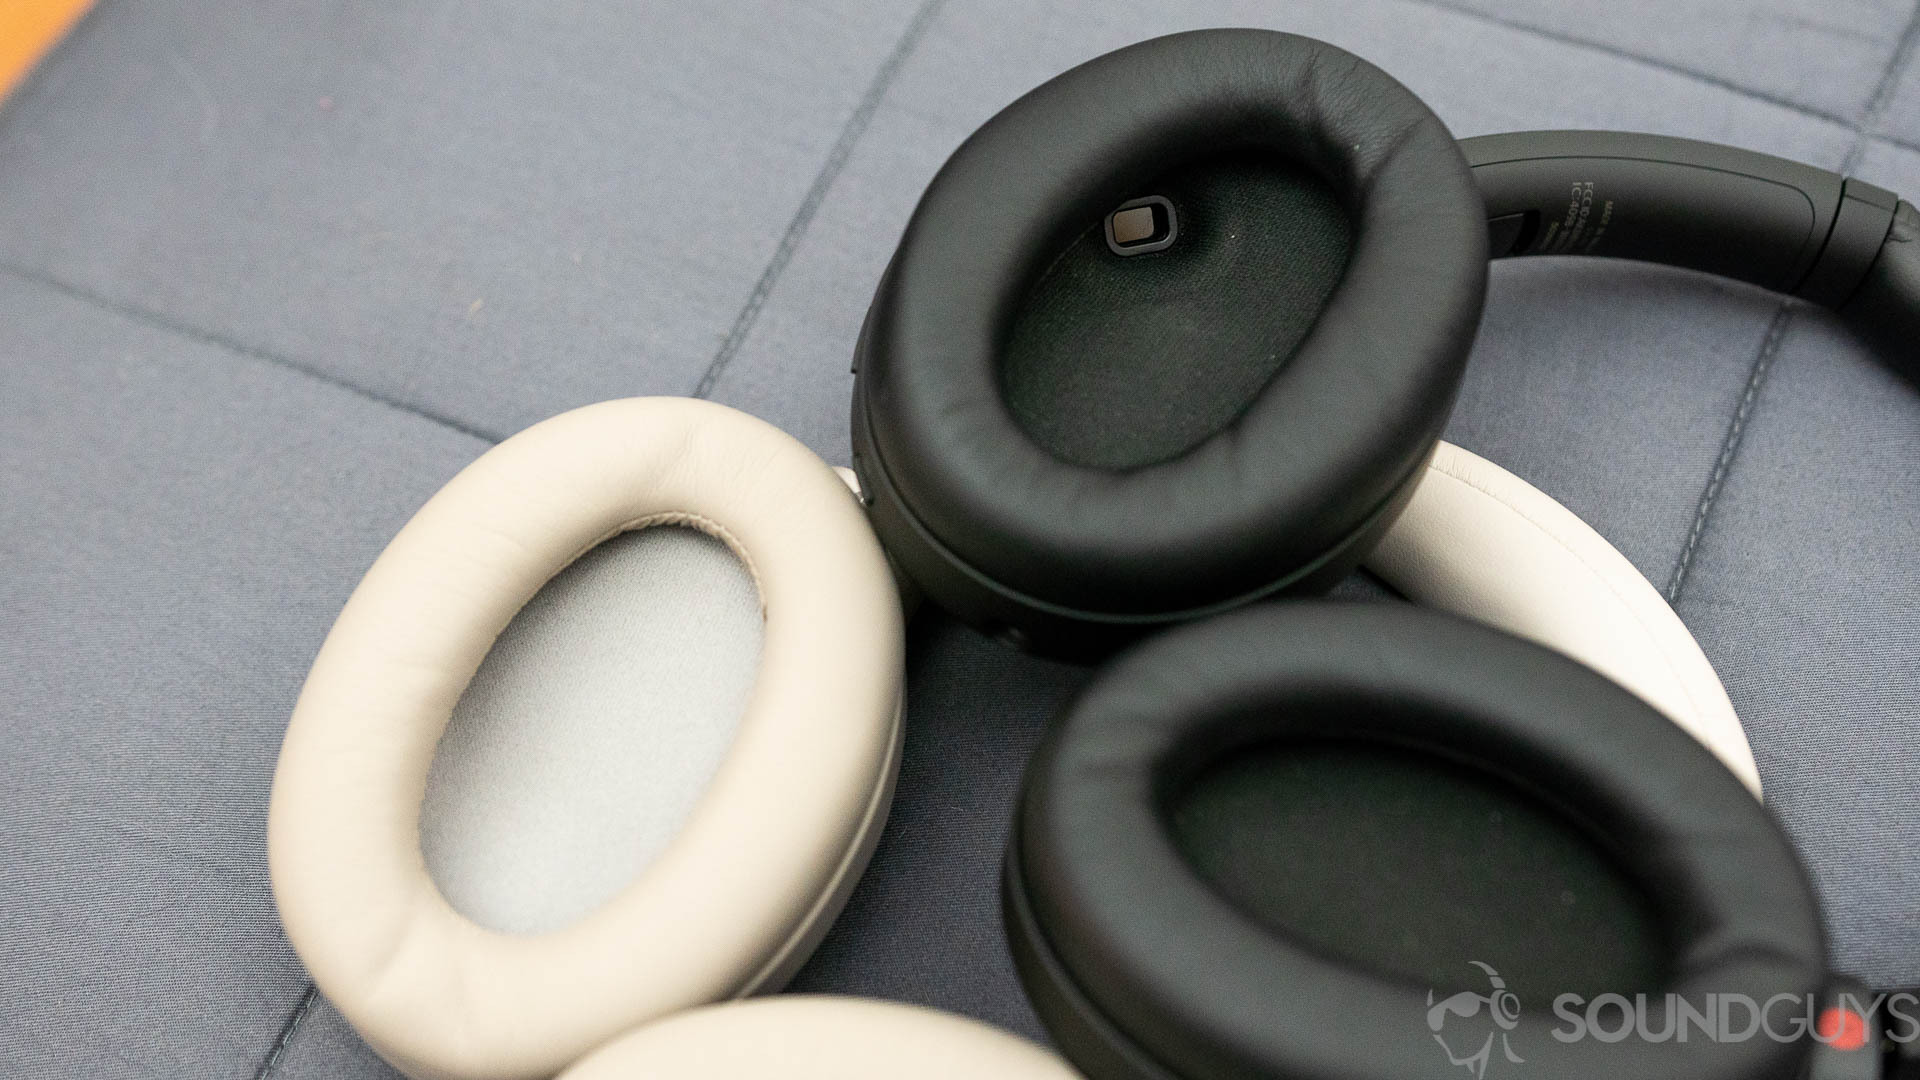 The Sony WH-1000XM3 and Sony WH-1000XM4 lay on on top of the other, with their ear cups facing up, showing the interior sensor on the WH-1000XM4.